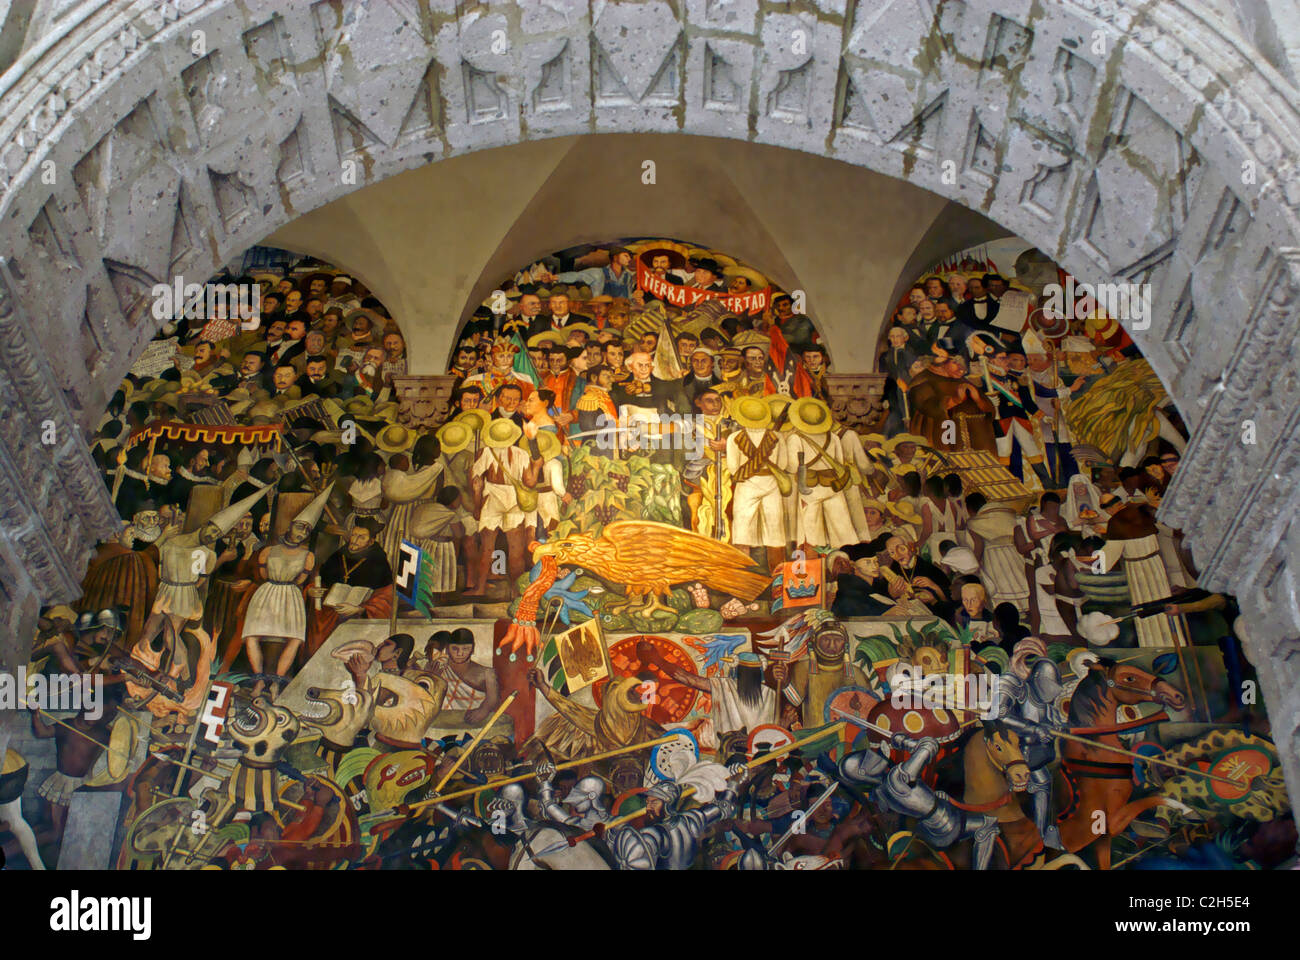 Mural by Diego Rivers depicting the history of Mexico, National Palace or Palacio Nacional, Mexico City Stock Photo